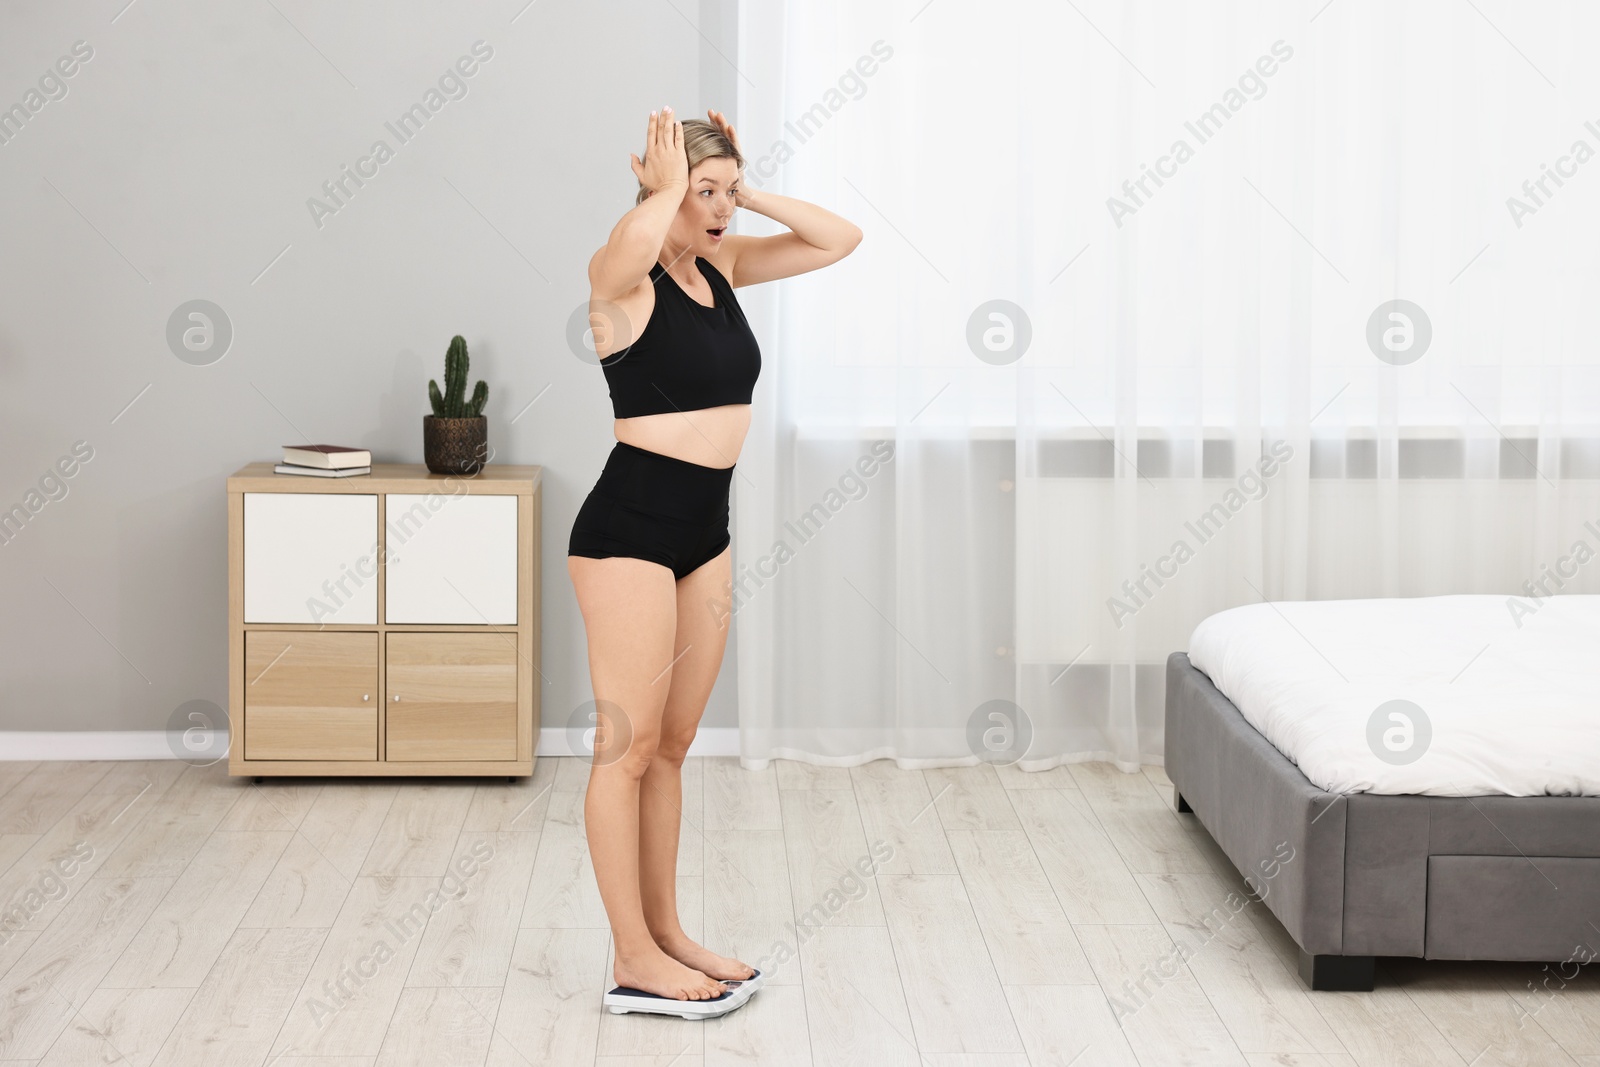 Photo of Surprised woman standing on floor scales at home